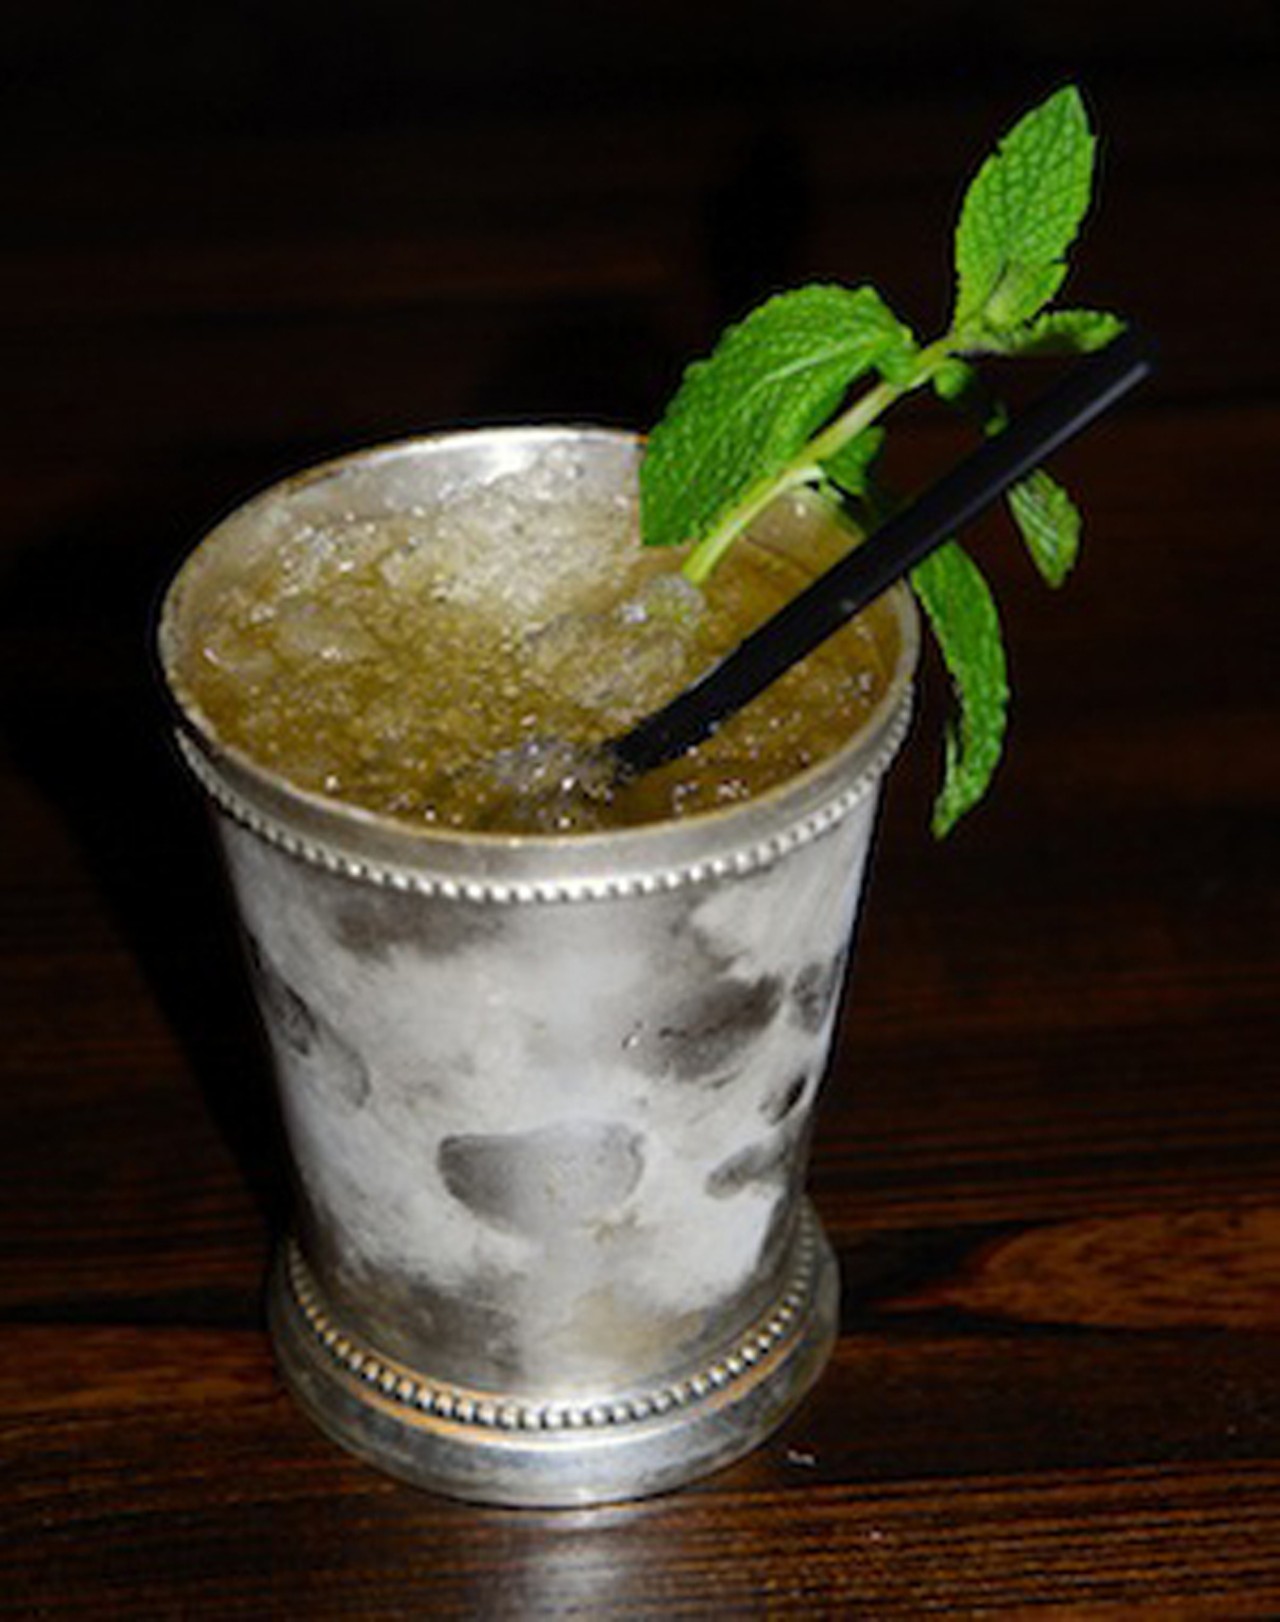 Sanctuaria's Mint Julep: Served in a chilled silver goblet, the Sanctuaria julep is worthy of a sweet Southern belle sitting on a warm Kentucky porch in May. It's not too fancy or avant garde. It's lots of mint and lots of bourbon and just the right amount of sweetness. And oh, that mint!